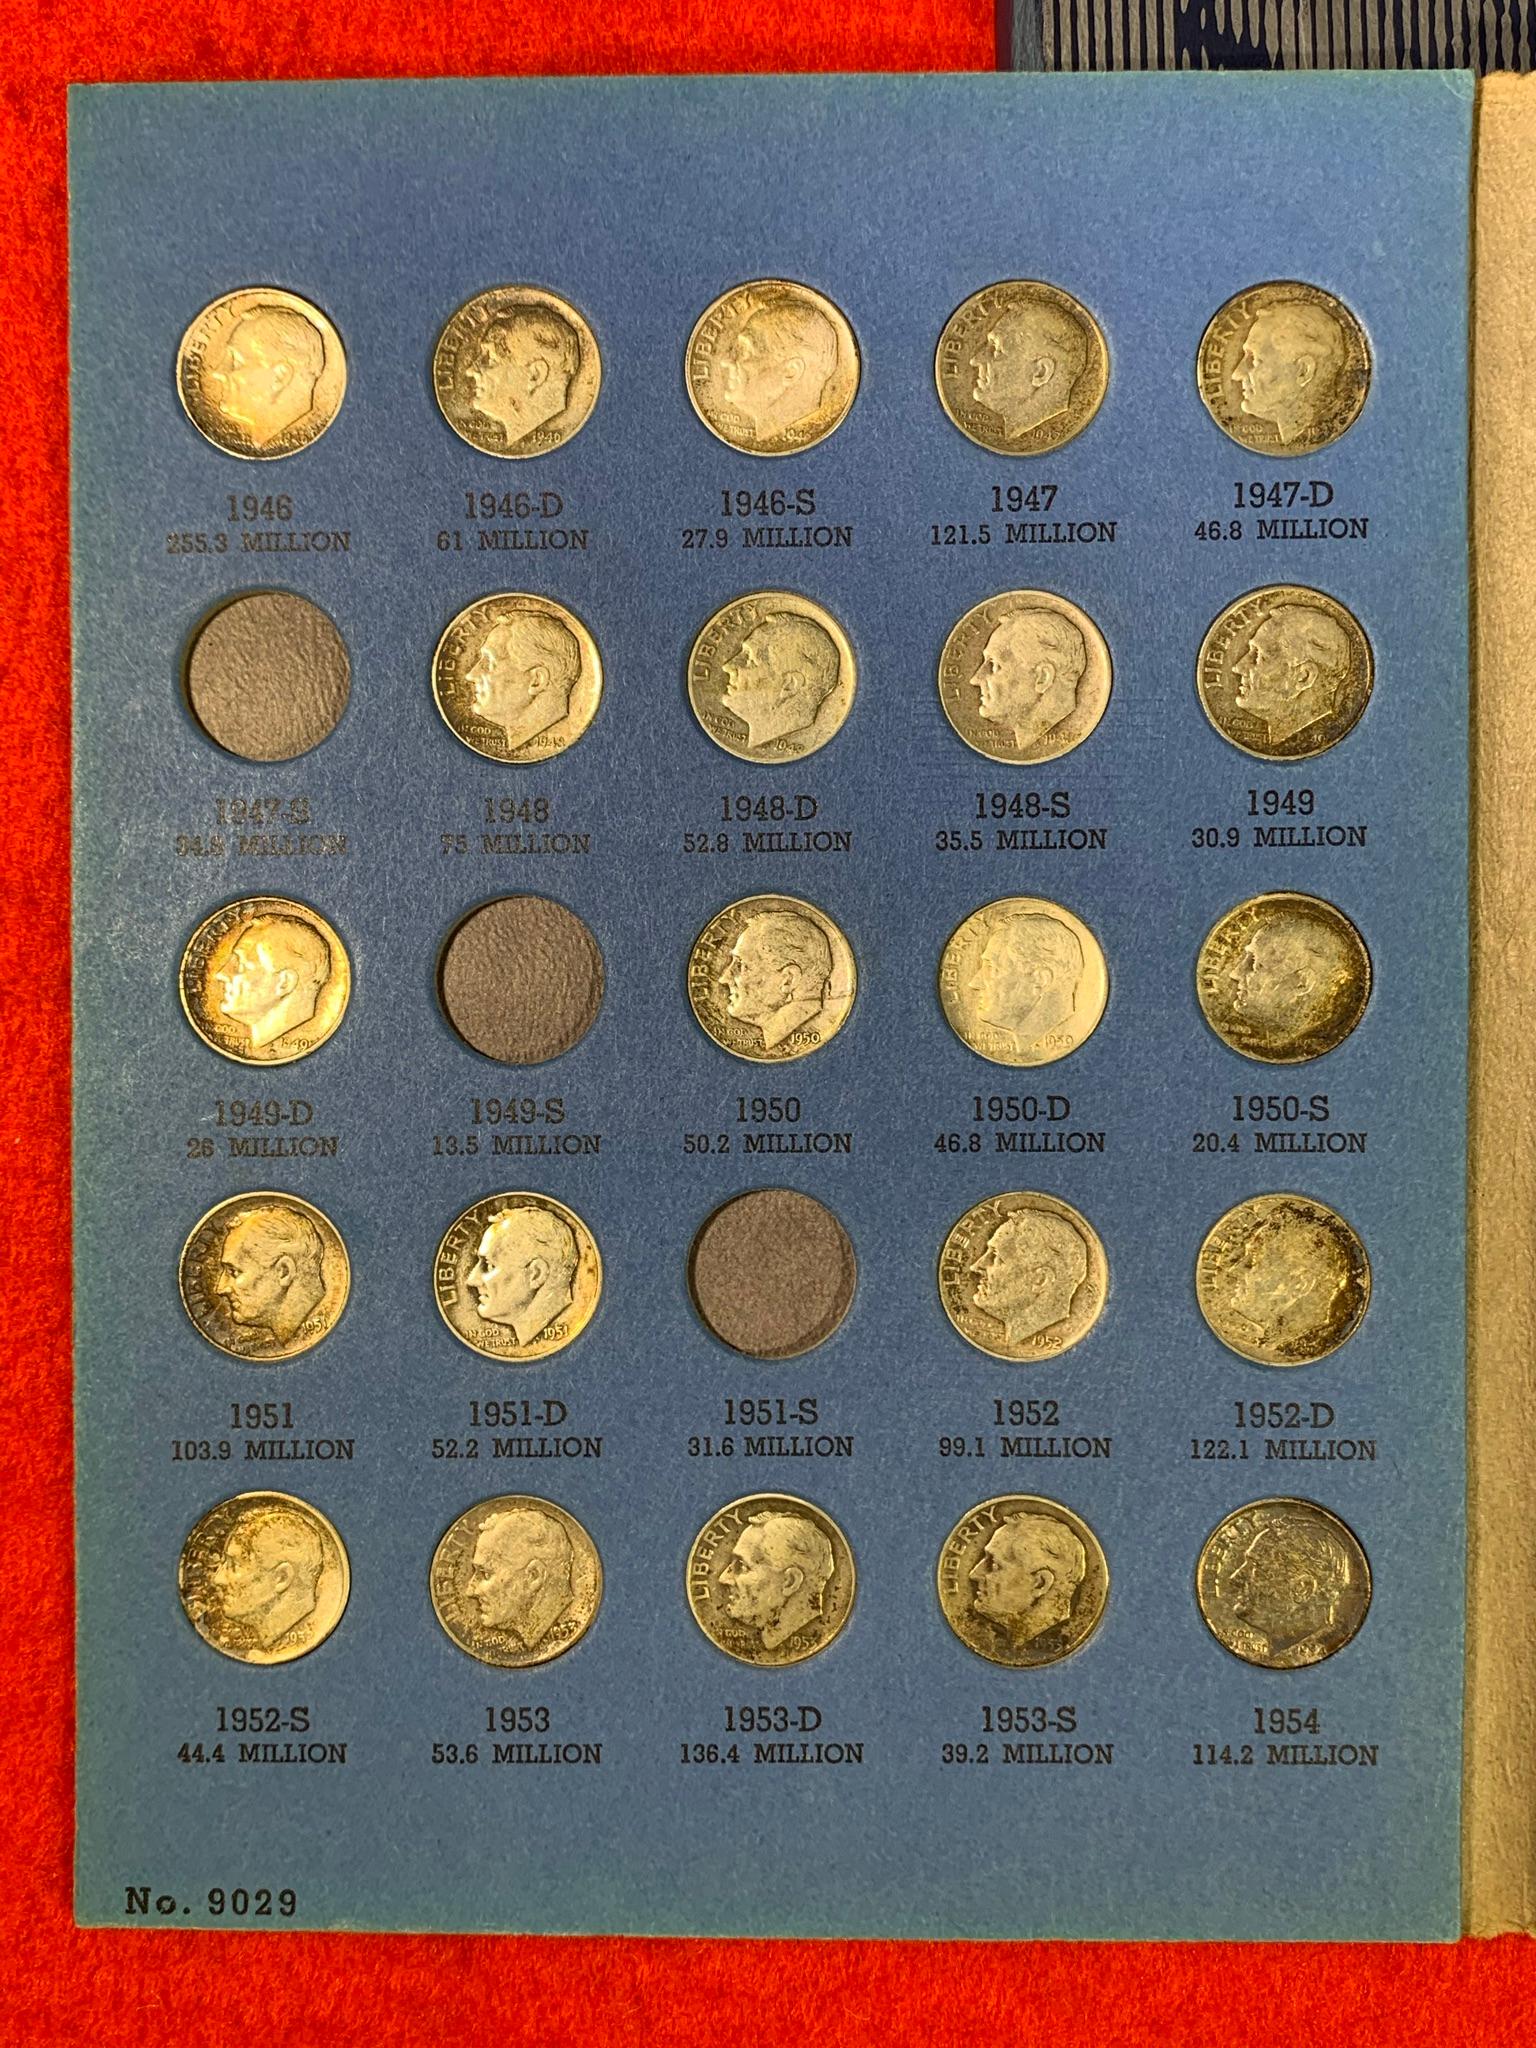 Roosevelt Dimes Collections Starting 1946 and 1965.  "Mercury" Head Dime Collection 1916 to 1945